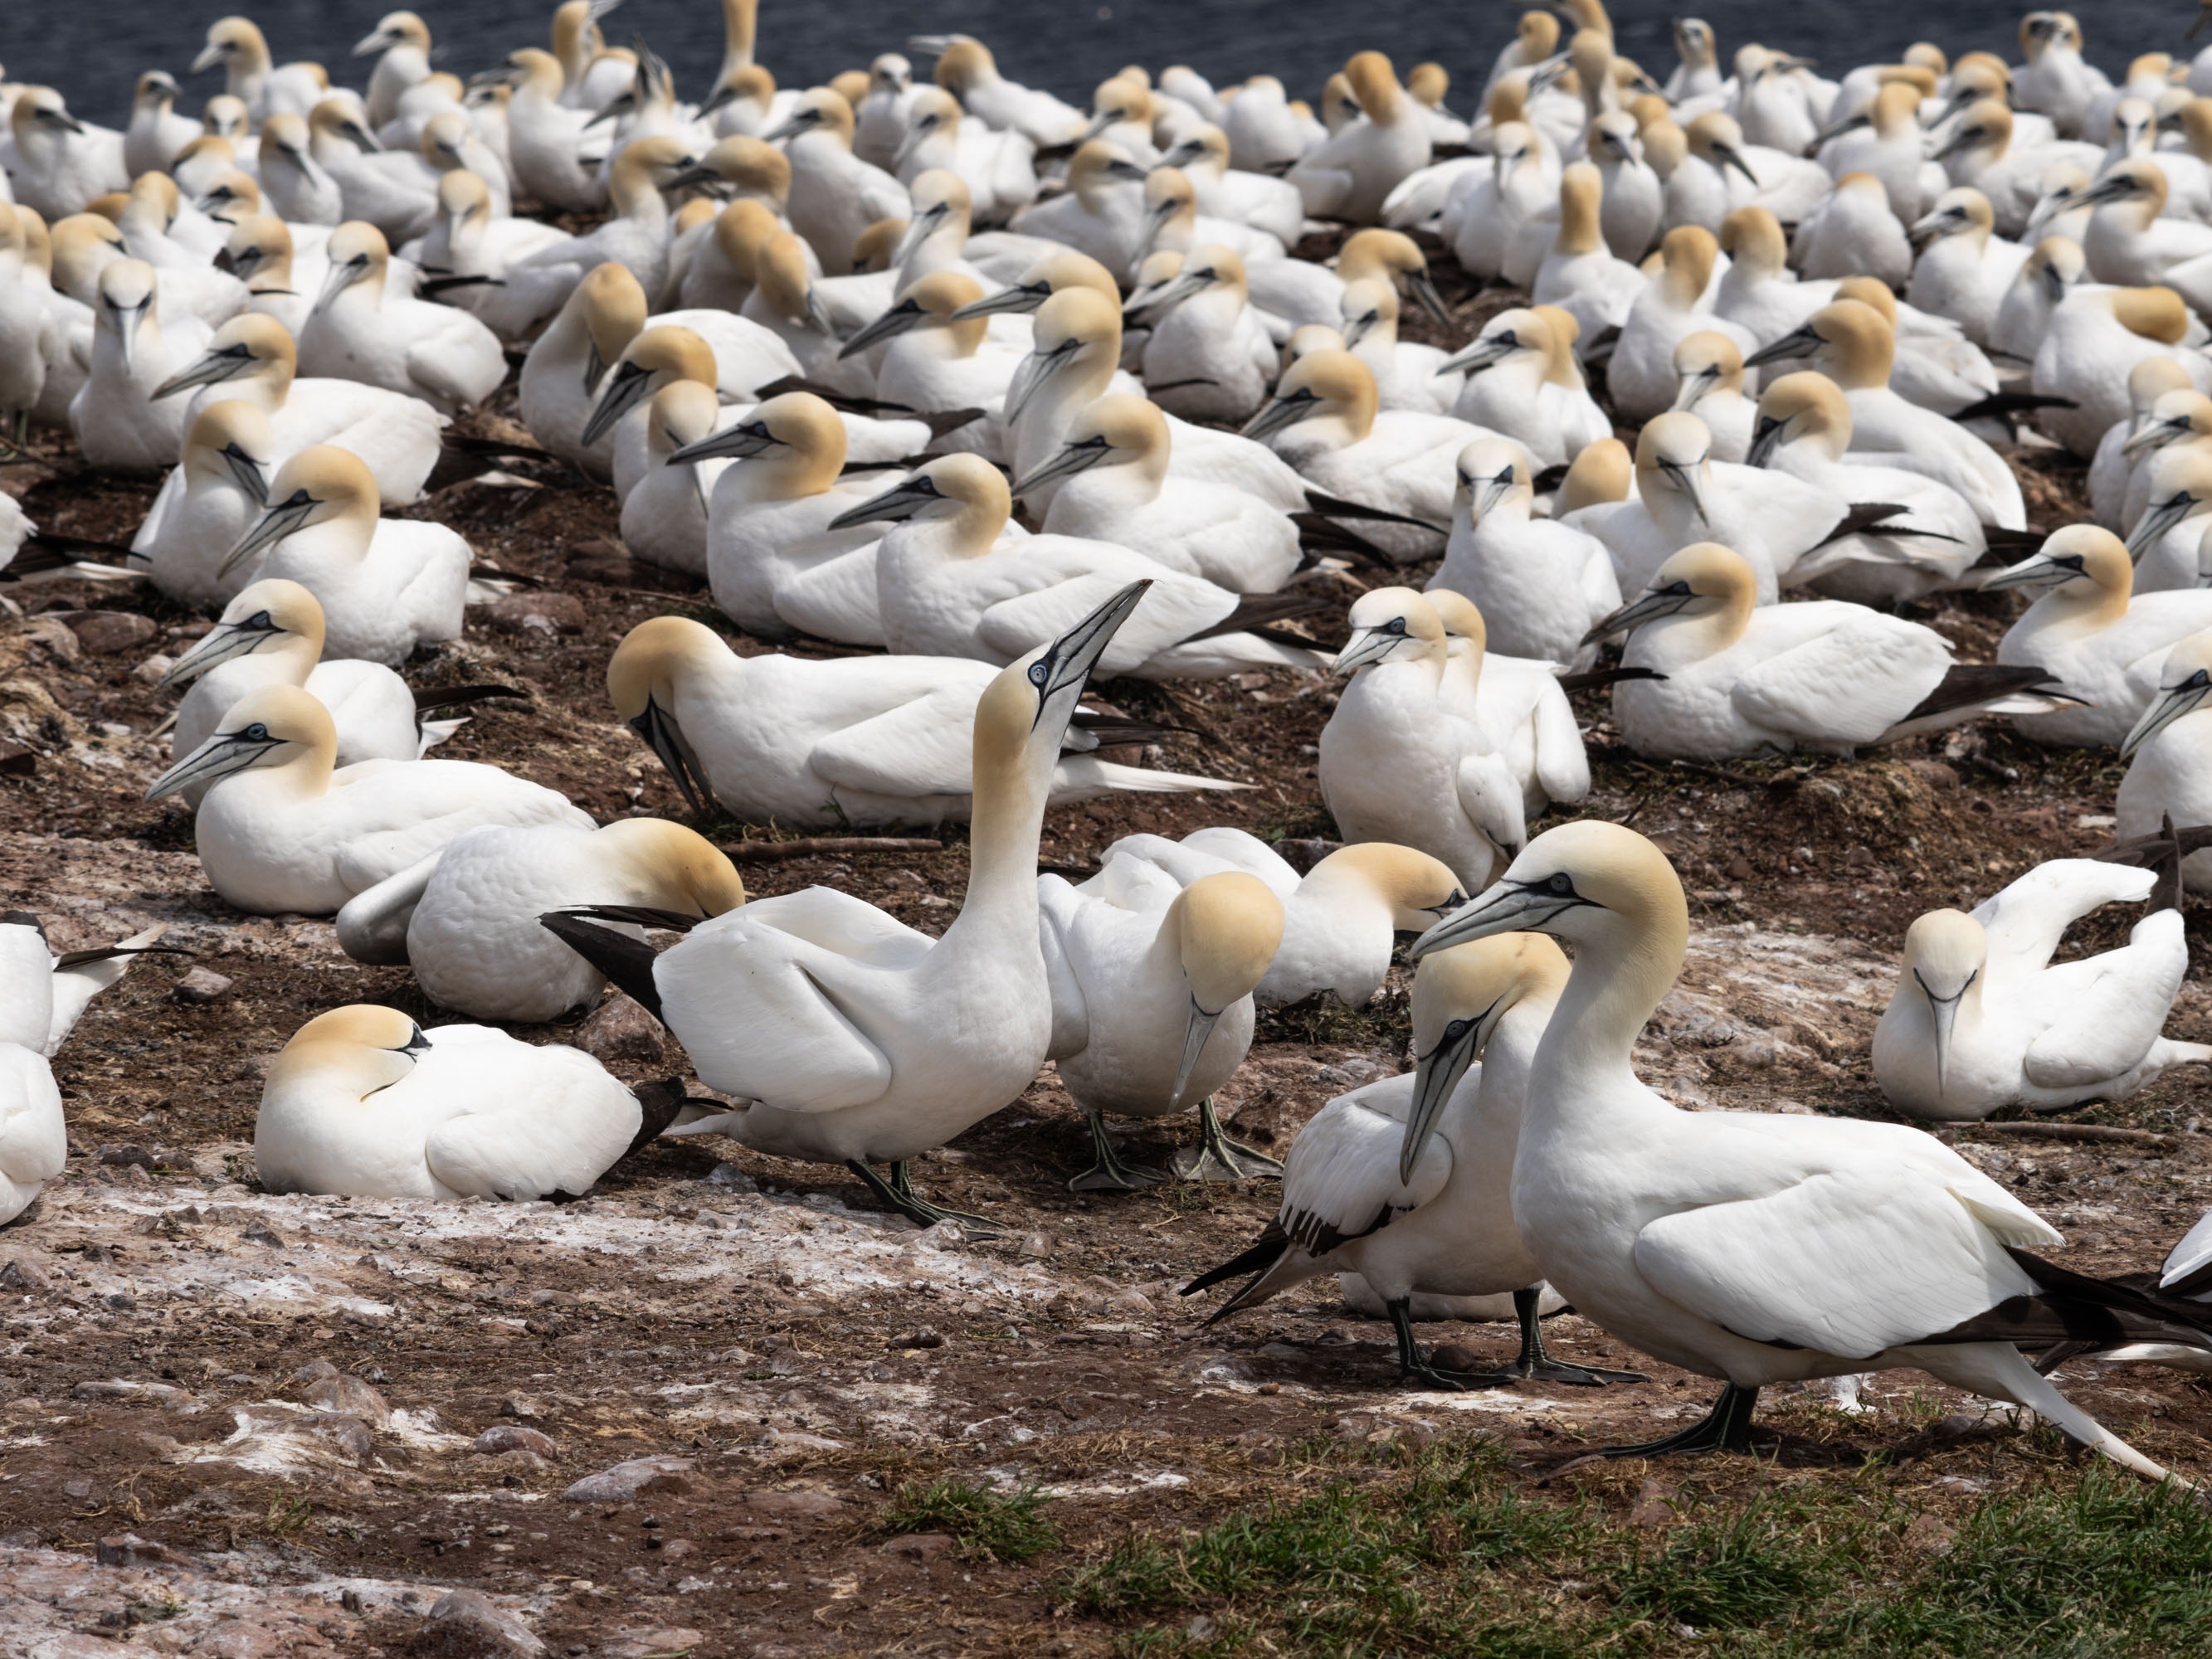 A flock of northern gannets on a field.